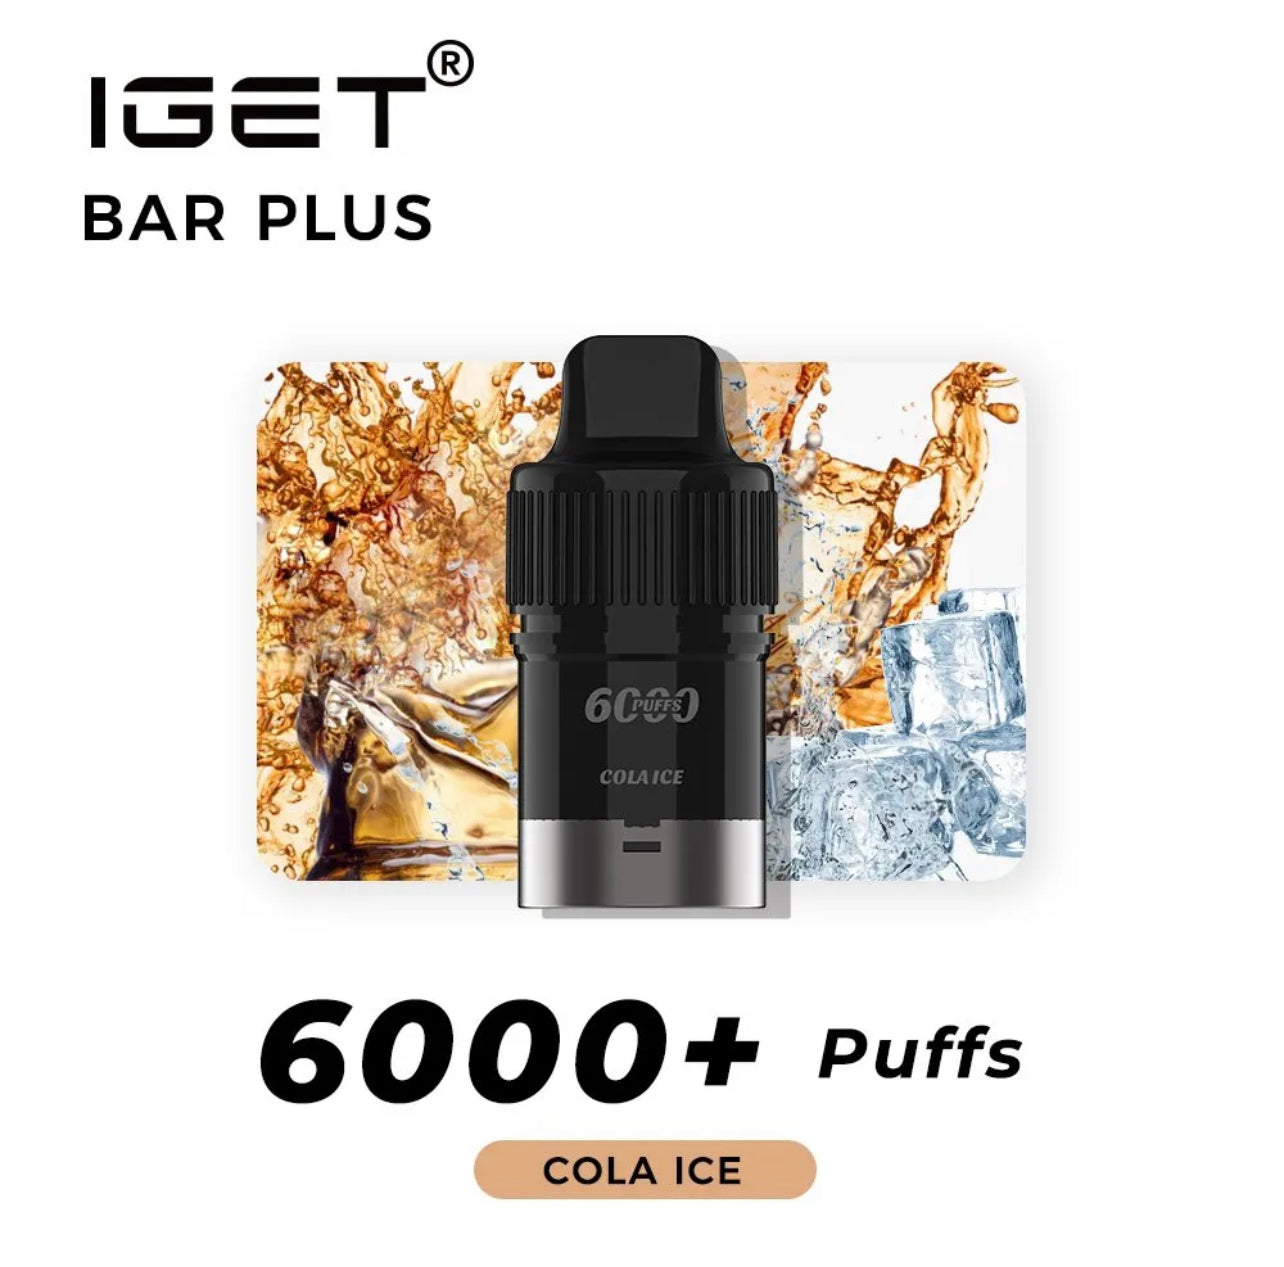 COLA ICE POD ONLY 6000 PUFFS